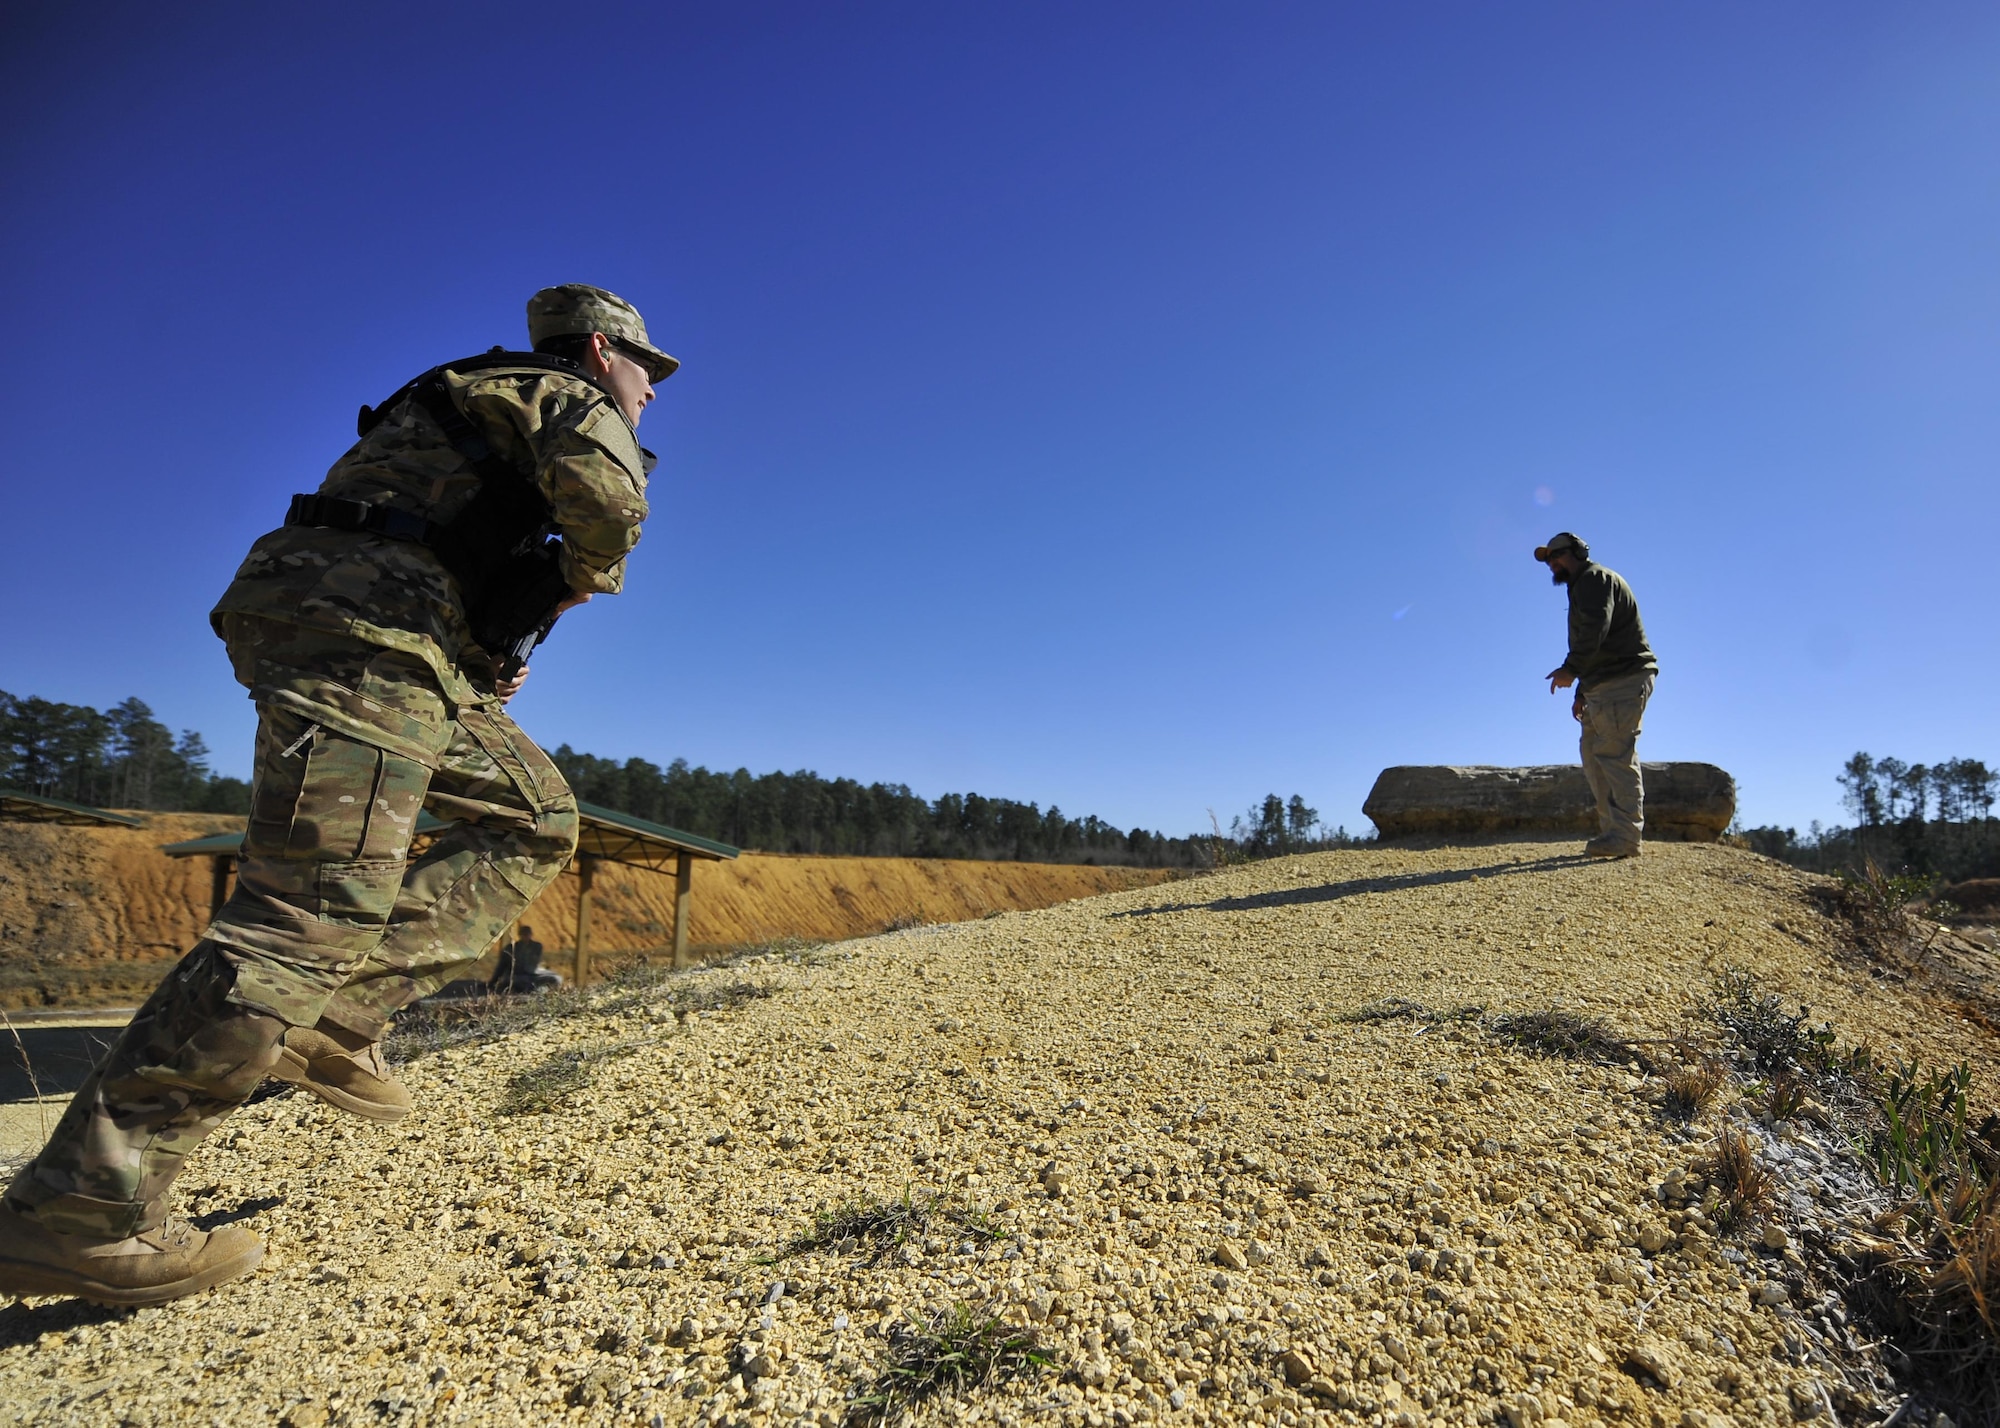 Second Lt. Blaine Driscoll, a combat systems operator with the 19th Special Operations Squadron, runs to the final station of his ‘stress test’ at a firing range near Baker, Fla., Feb. 25, 2016. During the final evolution of training, students ran a ‘stress test.’ The exercise was intended to build students’ confidence translating the drills they practiced during their three days of range time, to actuals skills they may need downrange. (U.S. Air Force photo by Airman 1st Class Kai White)